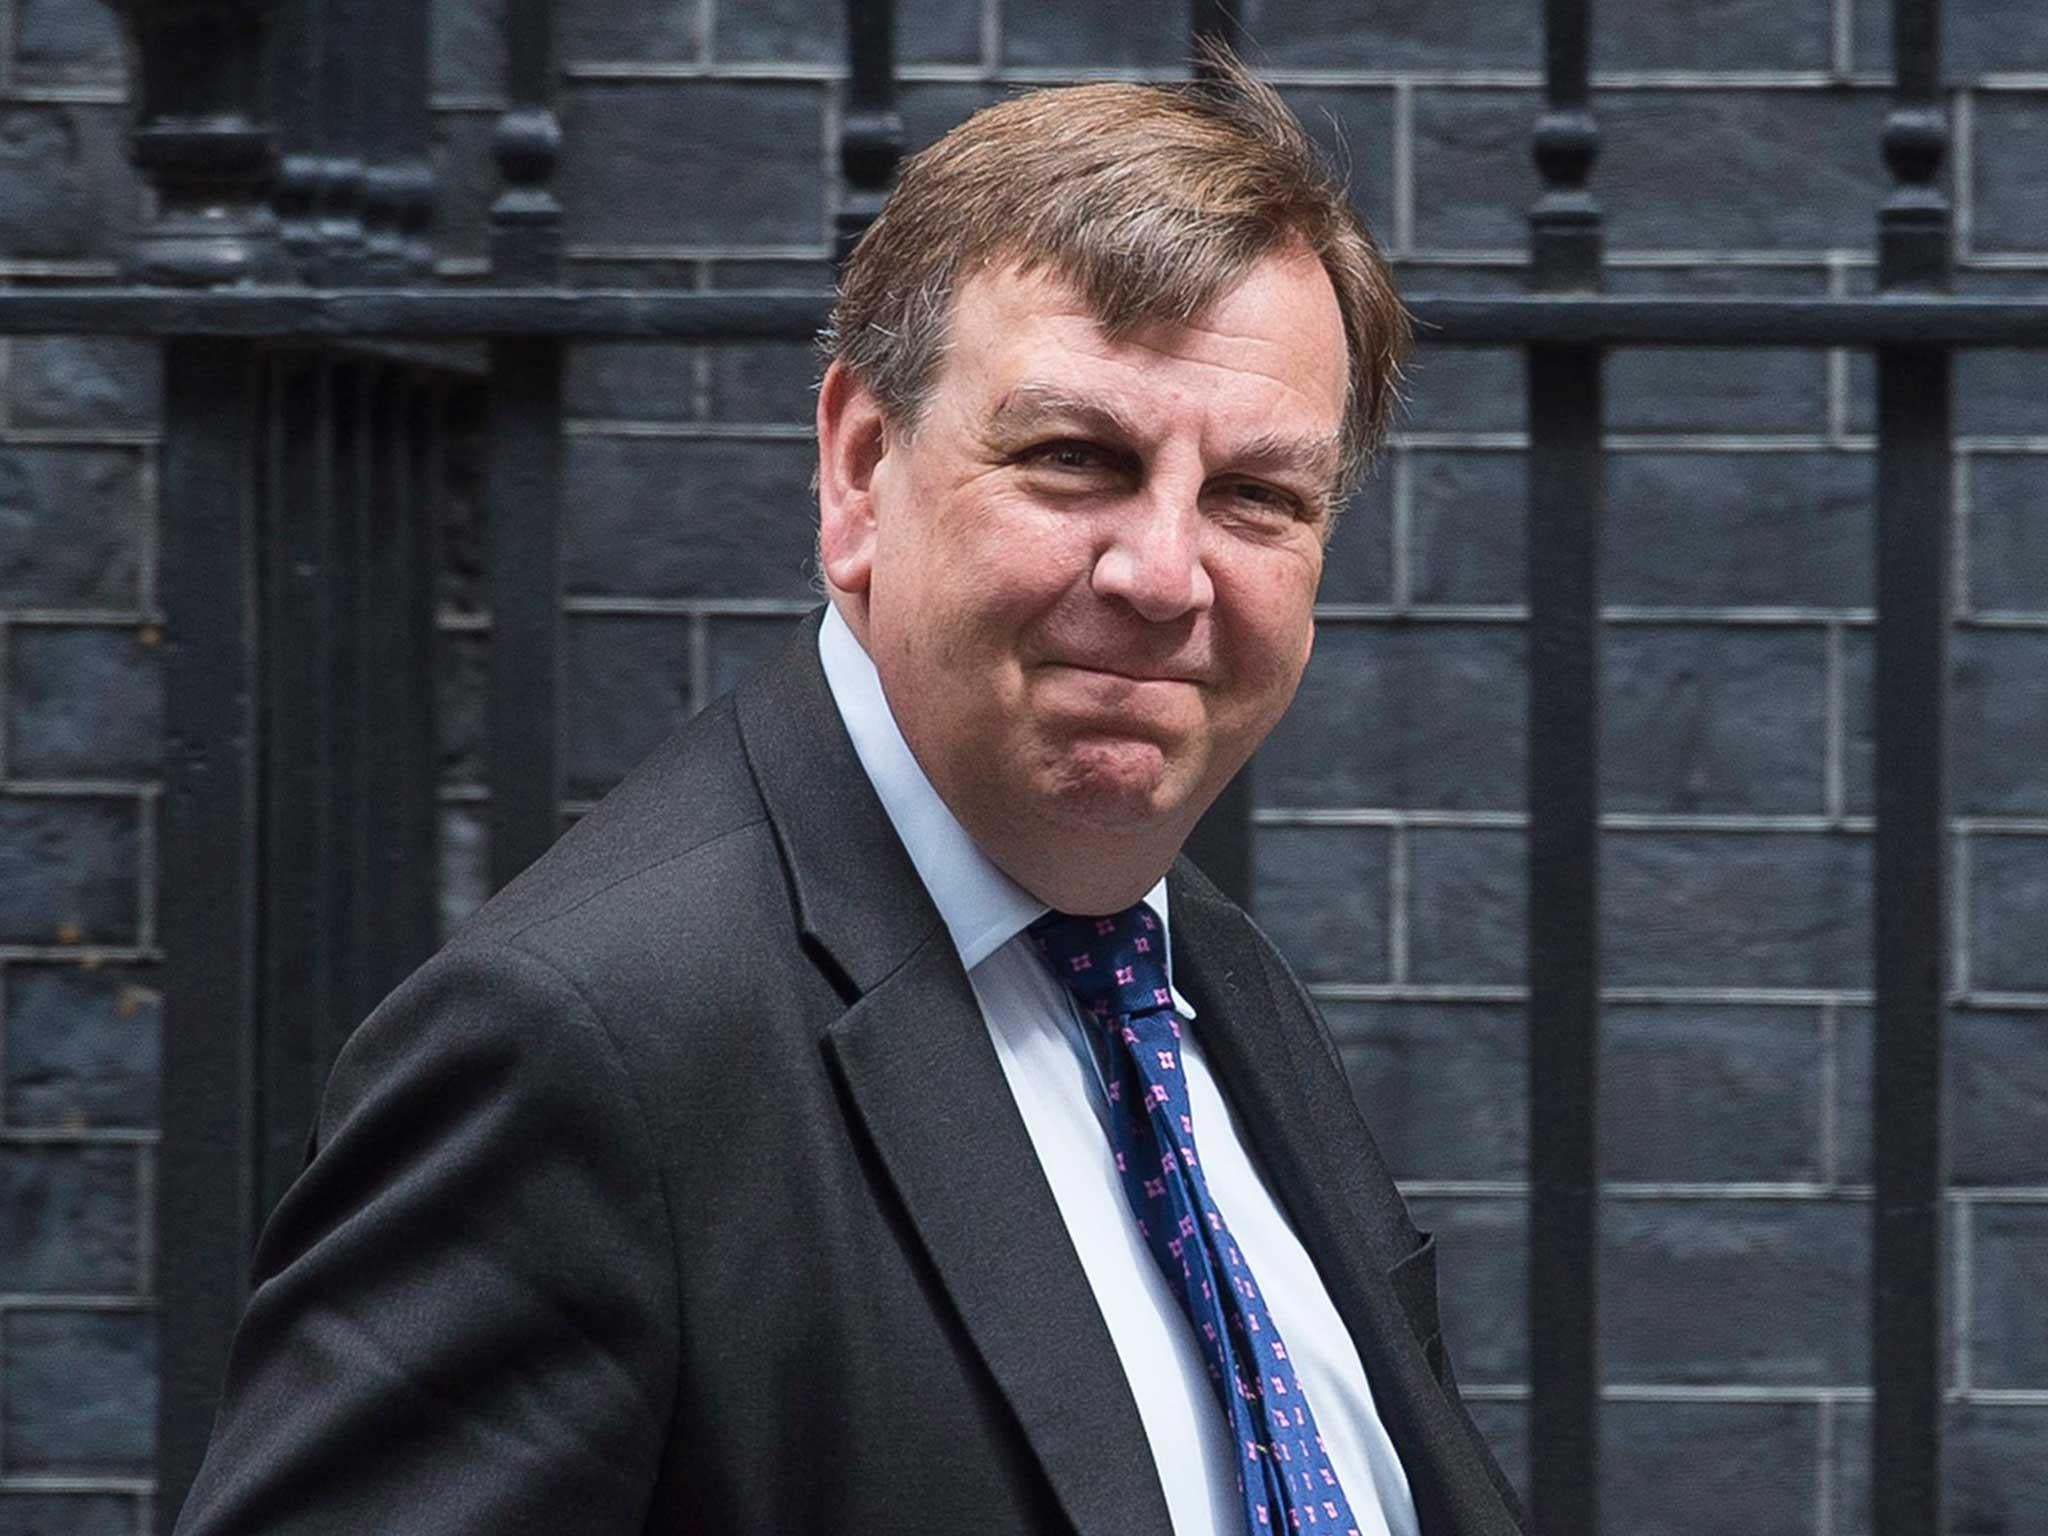 John Whittingdale arrives at No. 10 Downing Street for a cabinet meeting in London